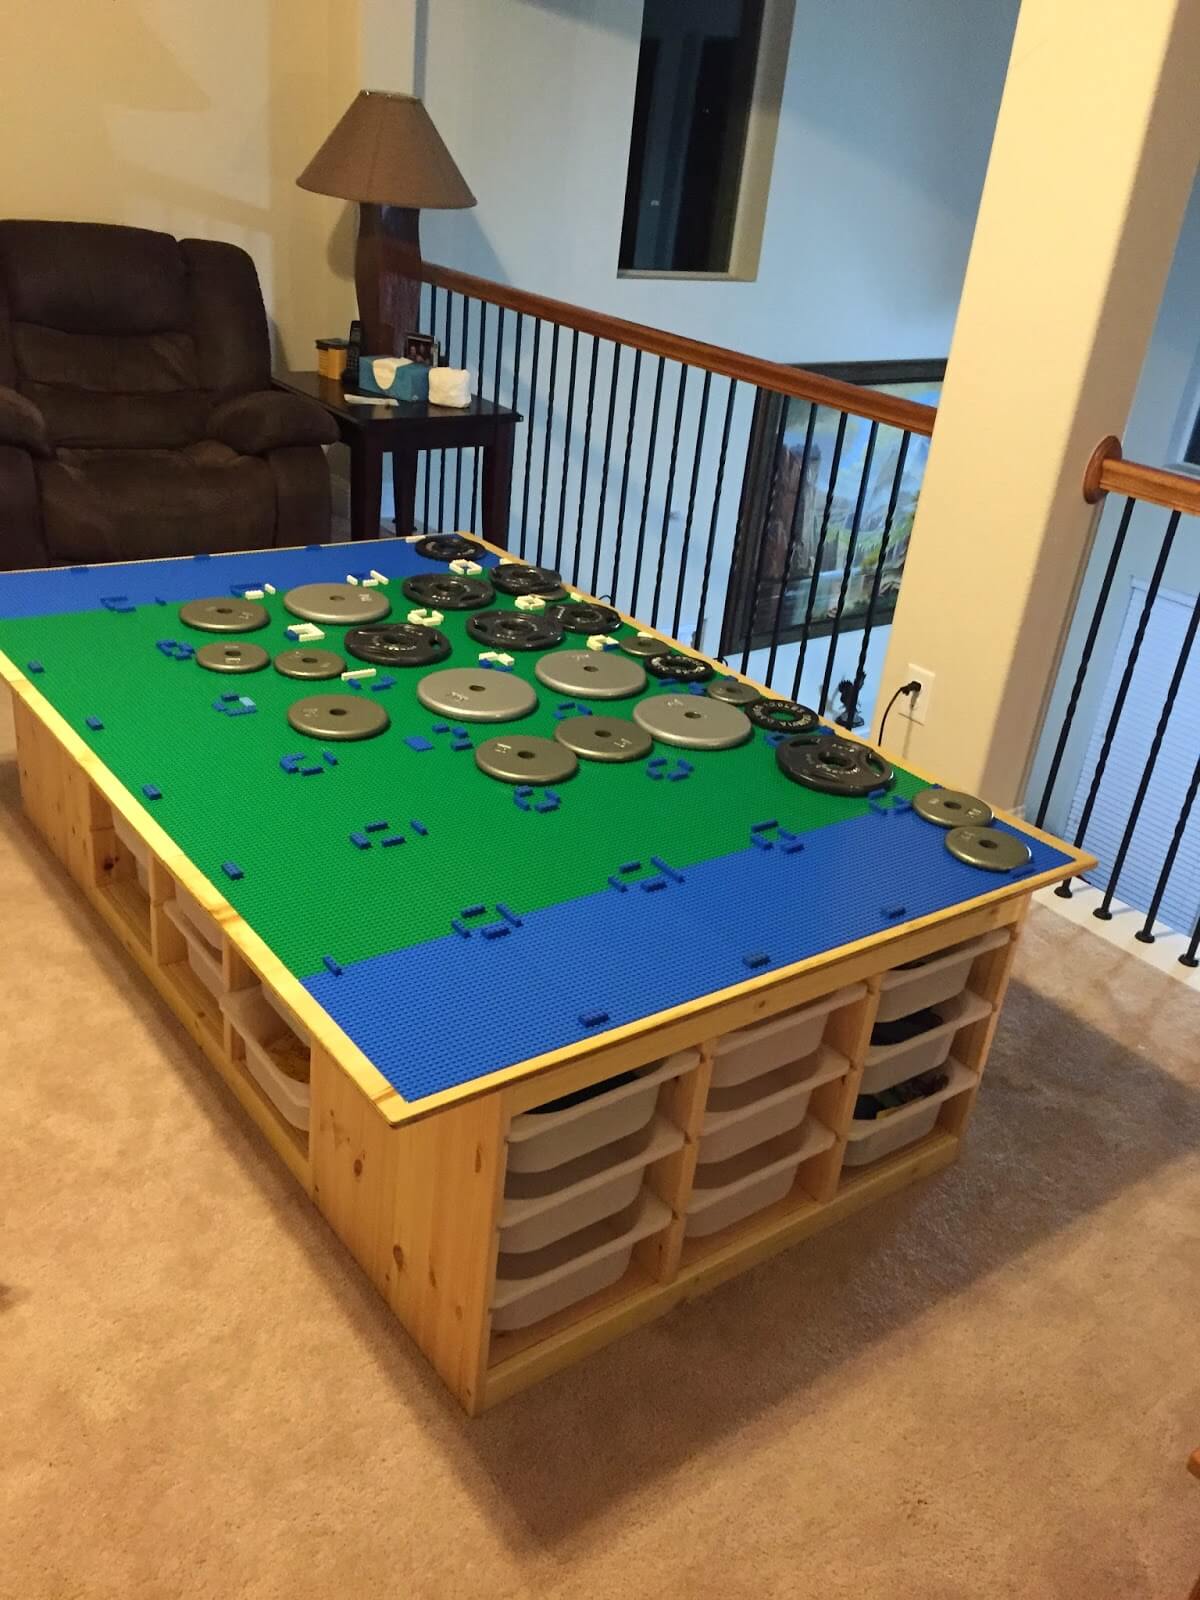 Lego Table Goes